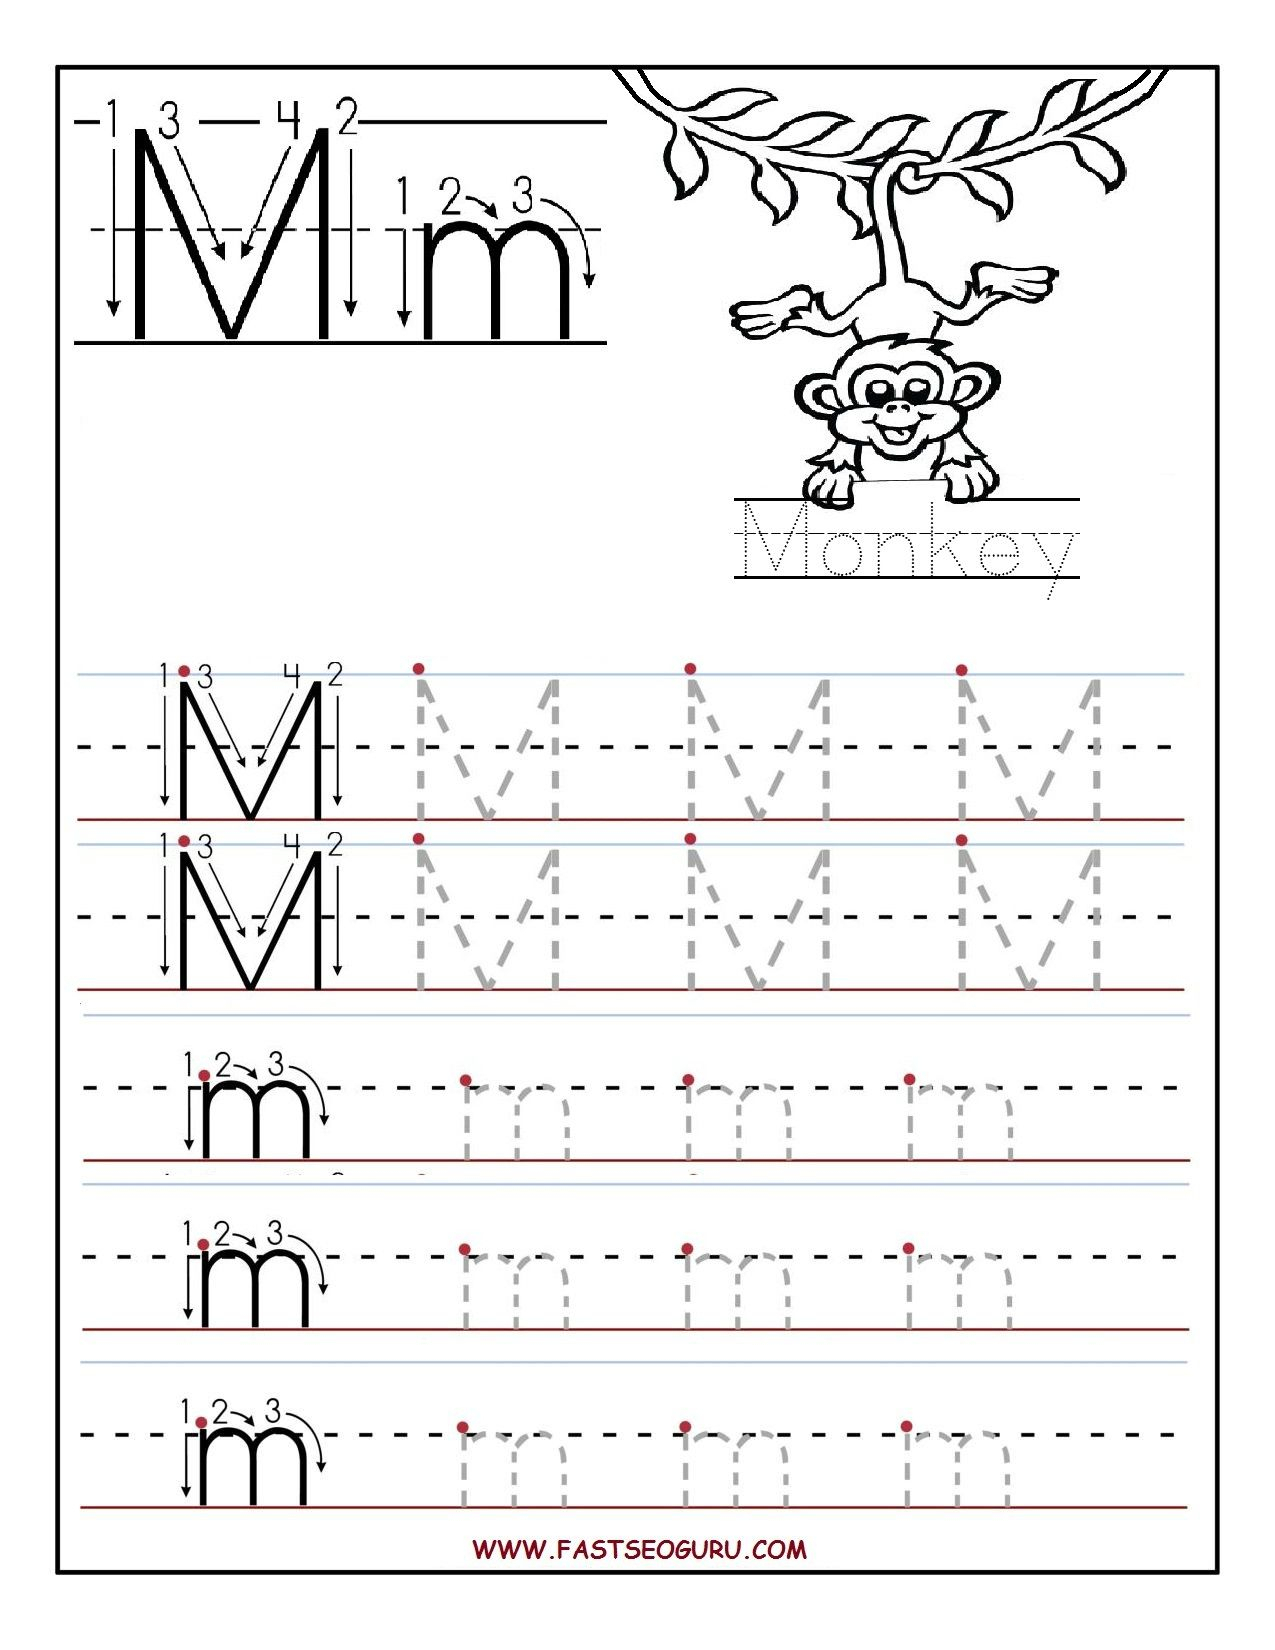 Printable Letter M Tracing Worksheets For Preschool for Letter M Worksheets For Preschoolers